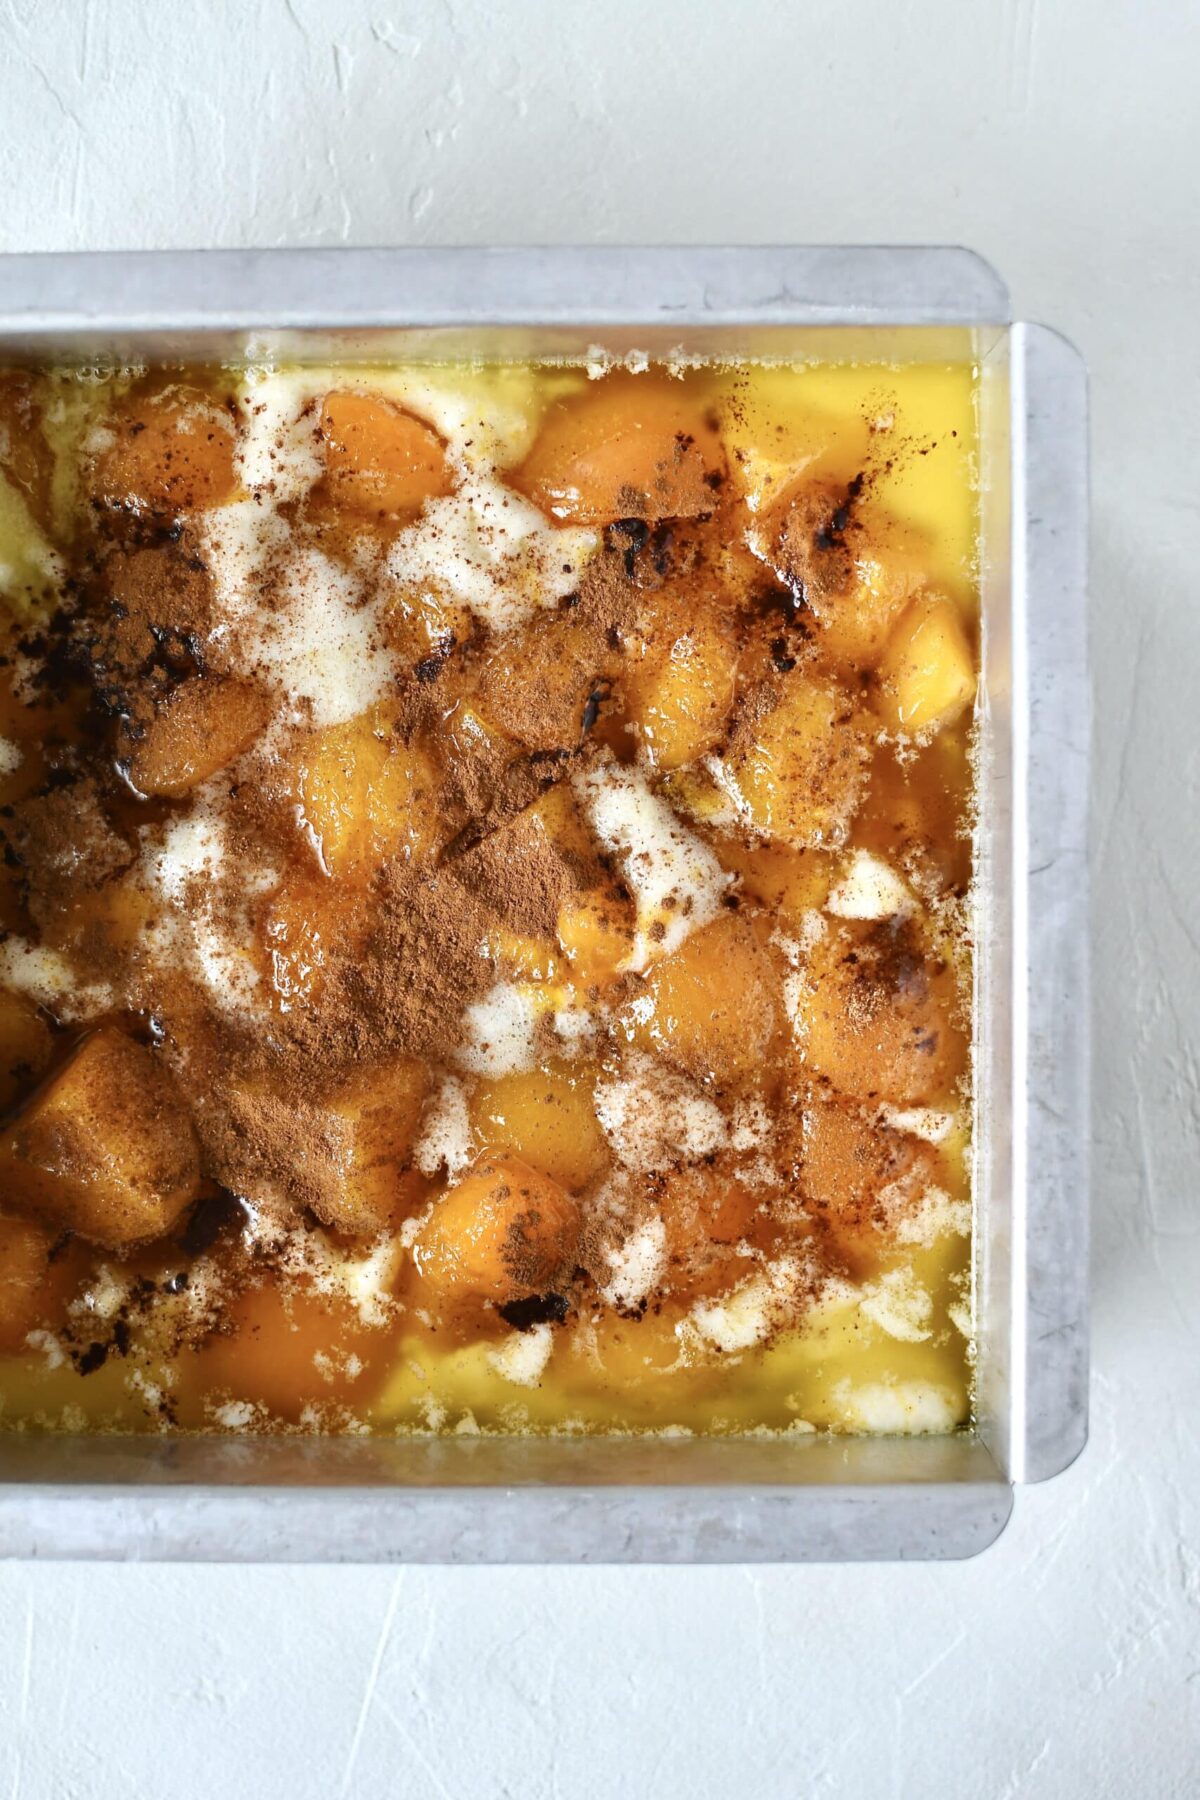 Fully prepared apricot cobbler, just before baking.